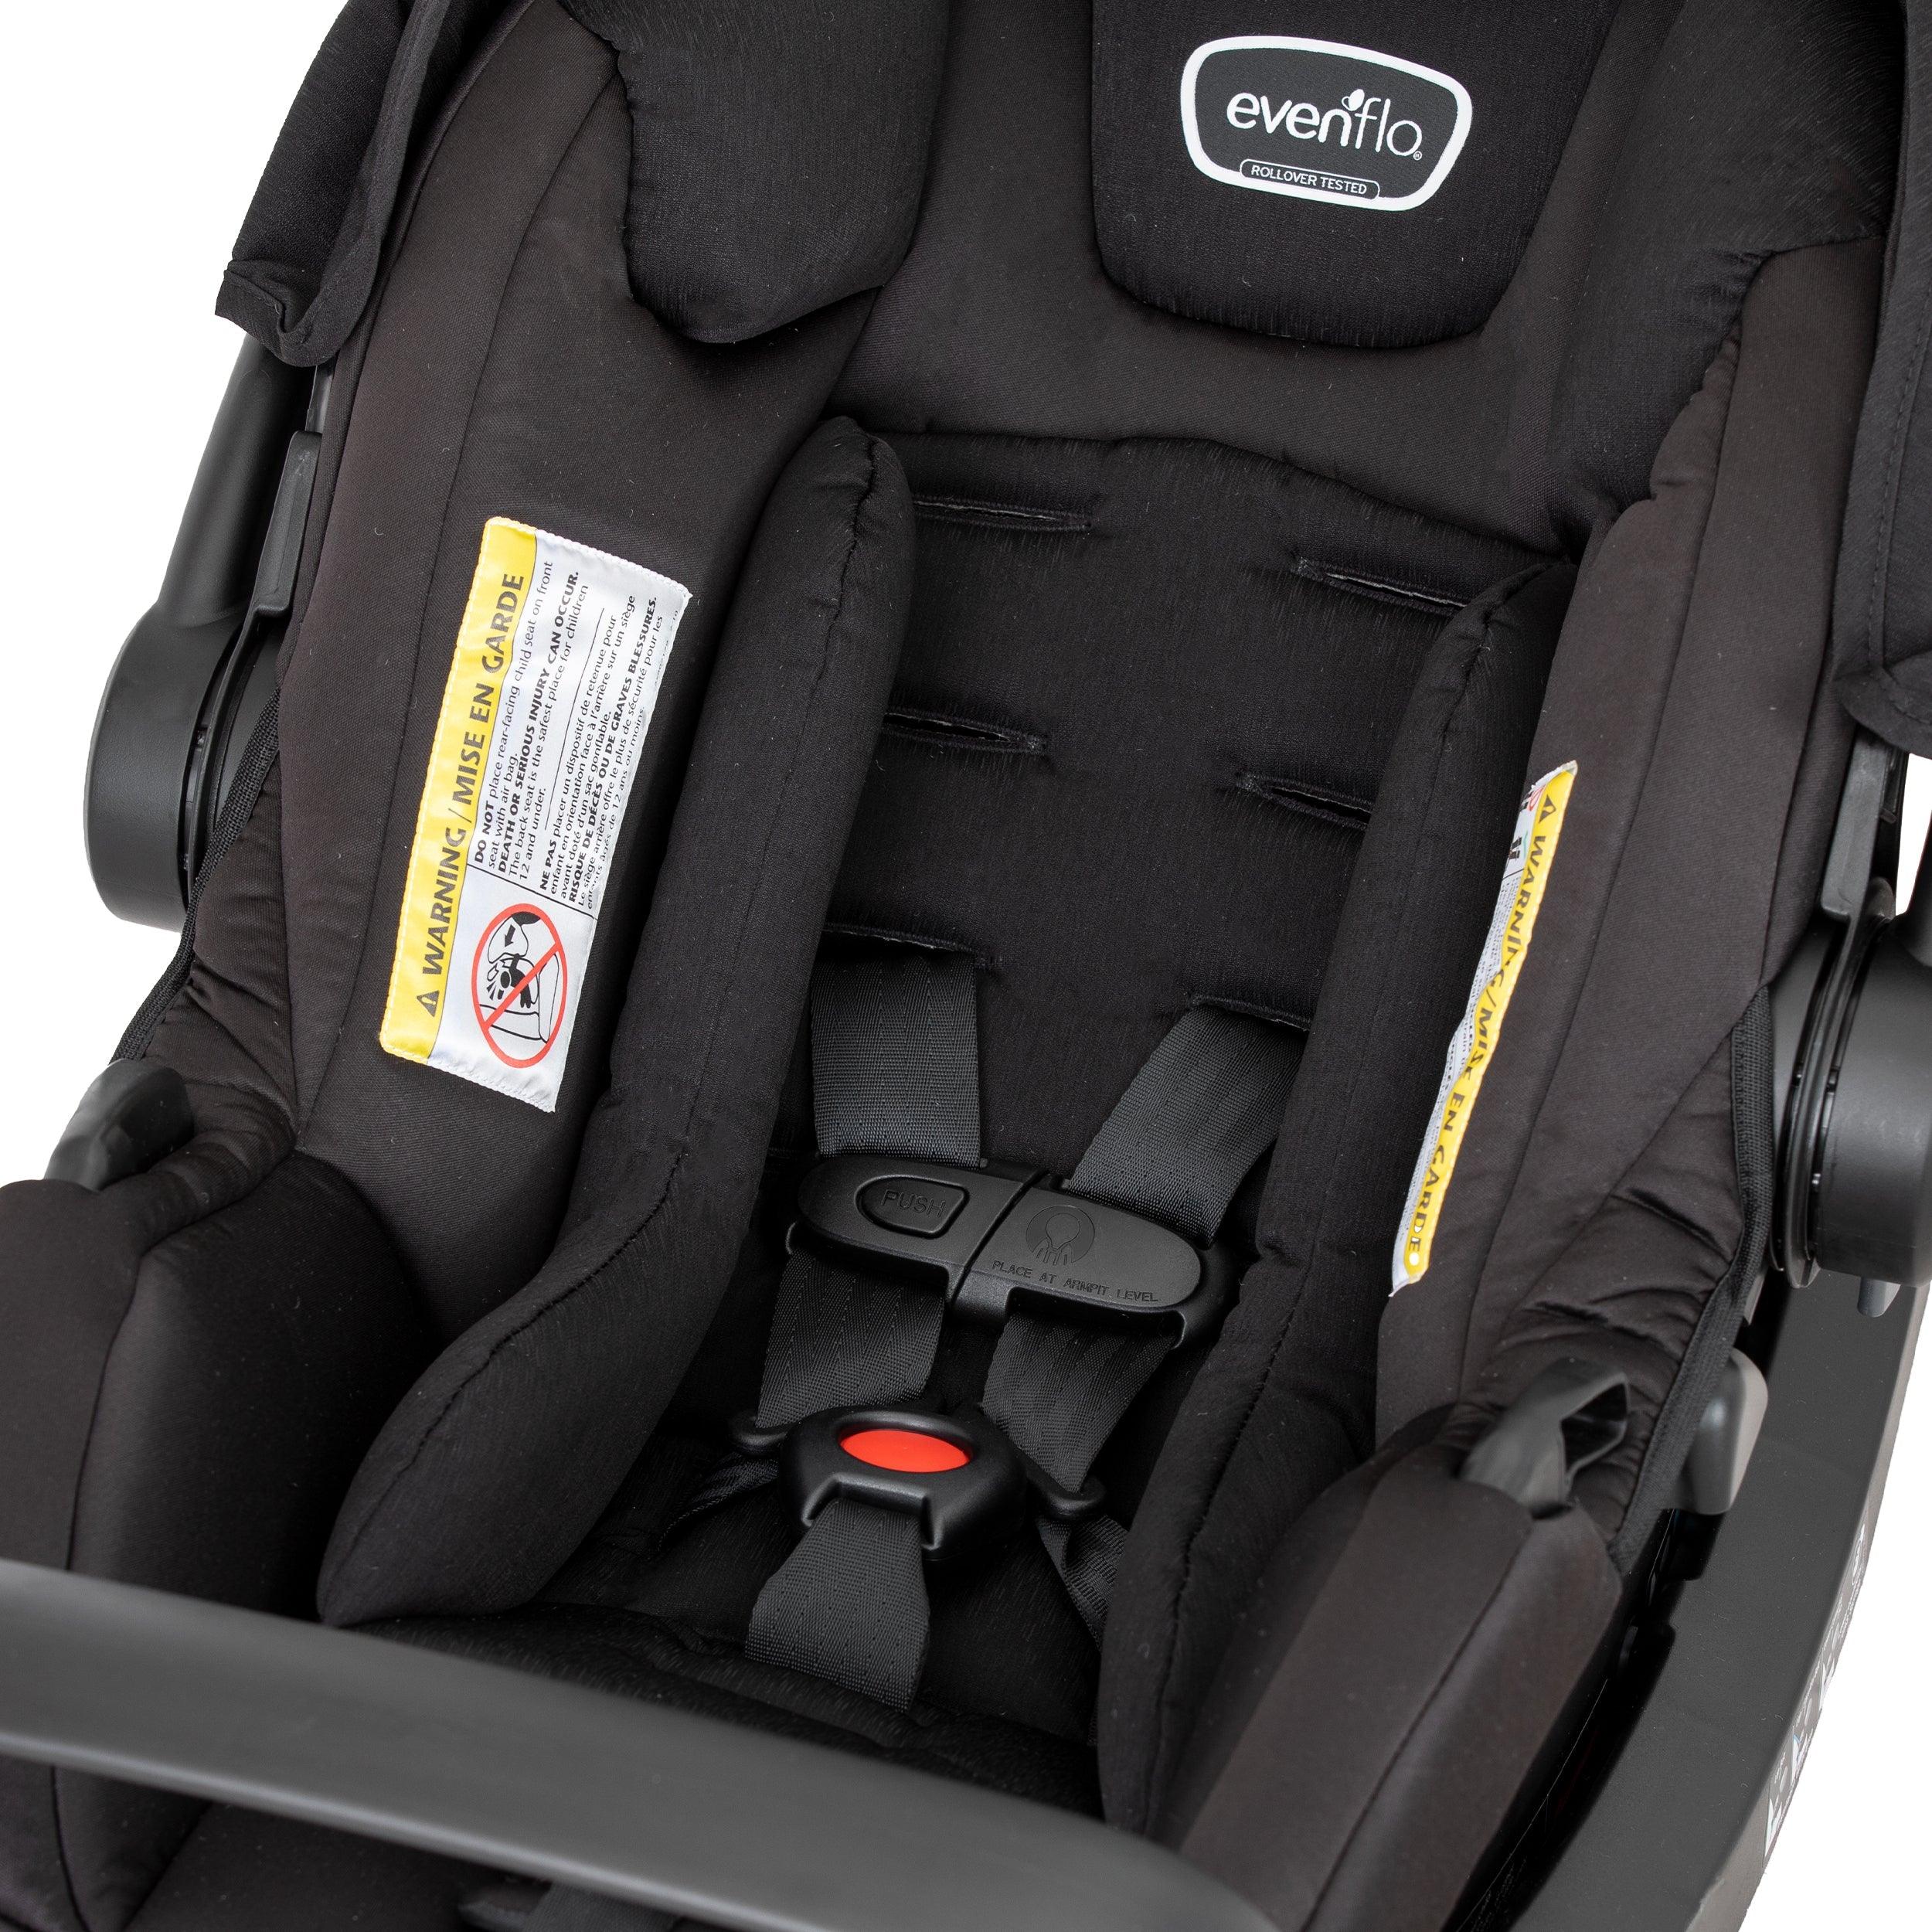 Pivot Suite Modular Travel System with LiteMax Infant Car Seat - MacroBaby